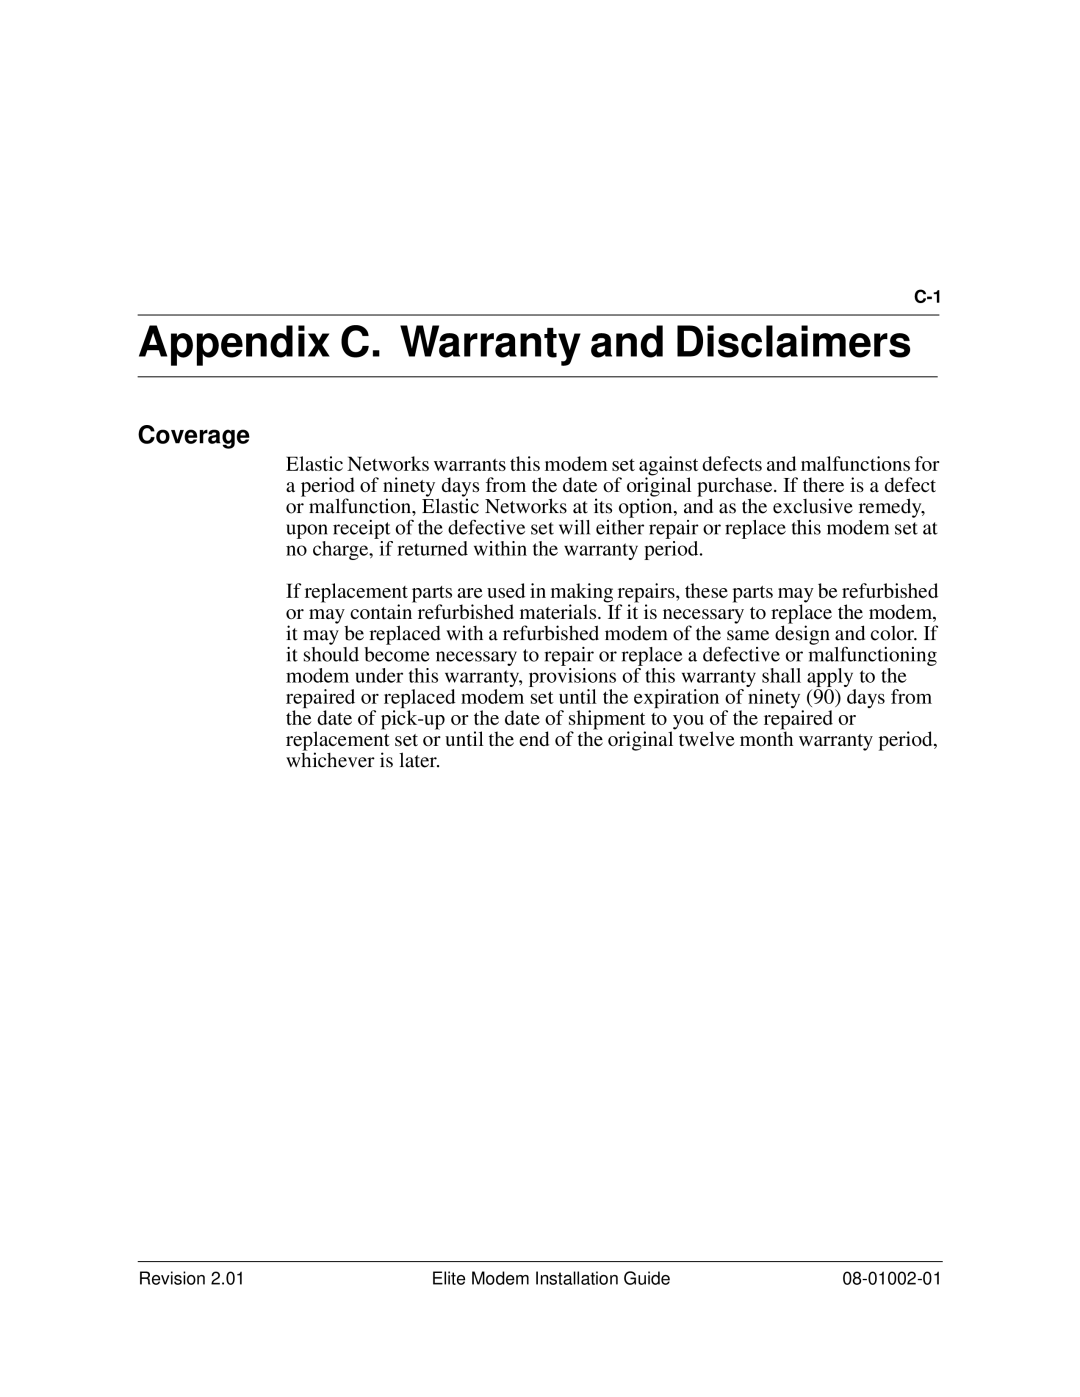 Zhone Technologies 08-01002-01 manual Appendix C. Warranty and DisclaimersC, Coverage 